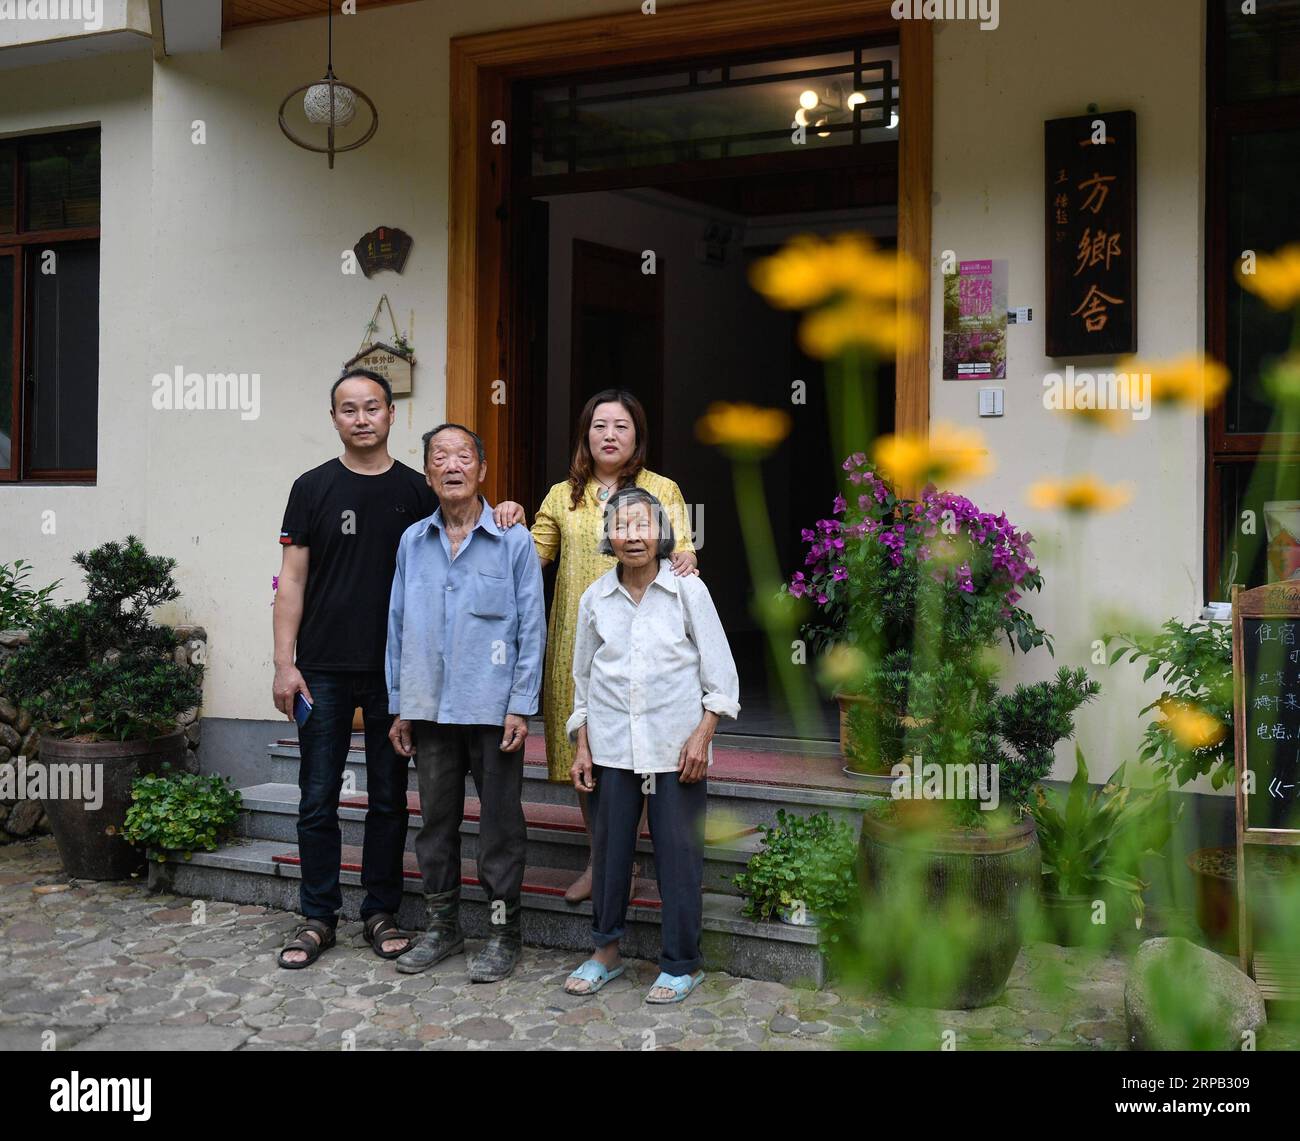 (190526) -- TONGLU, May 26, 2019 (Xinhua) -- Fang Dunwei (1st L), owners of a family inn, poses for a group photo with his family members at Shishe Village in Tonglu County, east China s Zhejiang Province, May 26, 2019. With remote location and beautiful scenery, Shishe Village is one of the three villages in Fuchun River slow rural life experience zone. In recent years, Shishe has repaired some ancient buildings. Cafes and homestays were also introduced here, which attracted a large number of tourists. In 2018, Shishe Village received more than 108,000 tourists, with a net income of more than Stock Photo